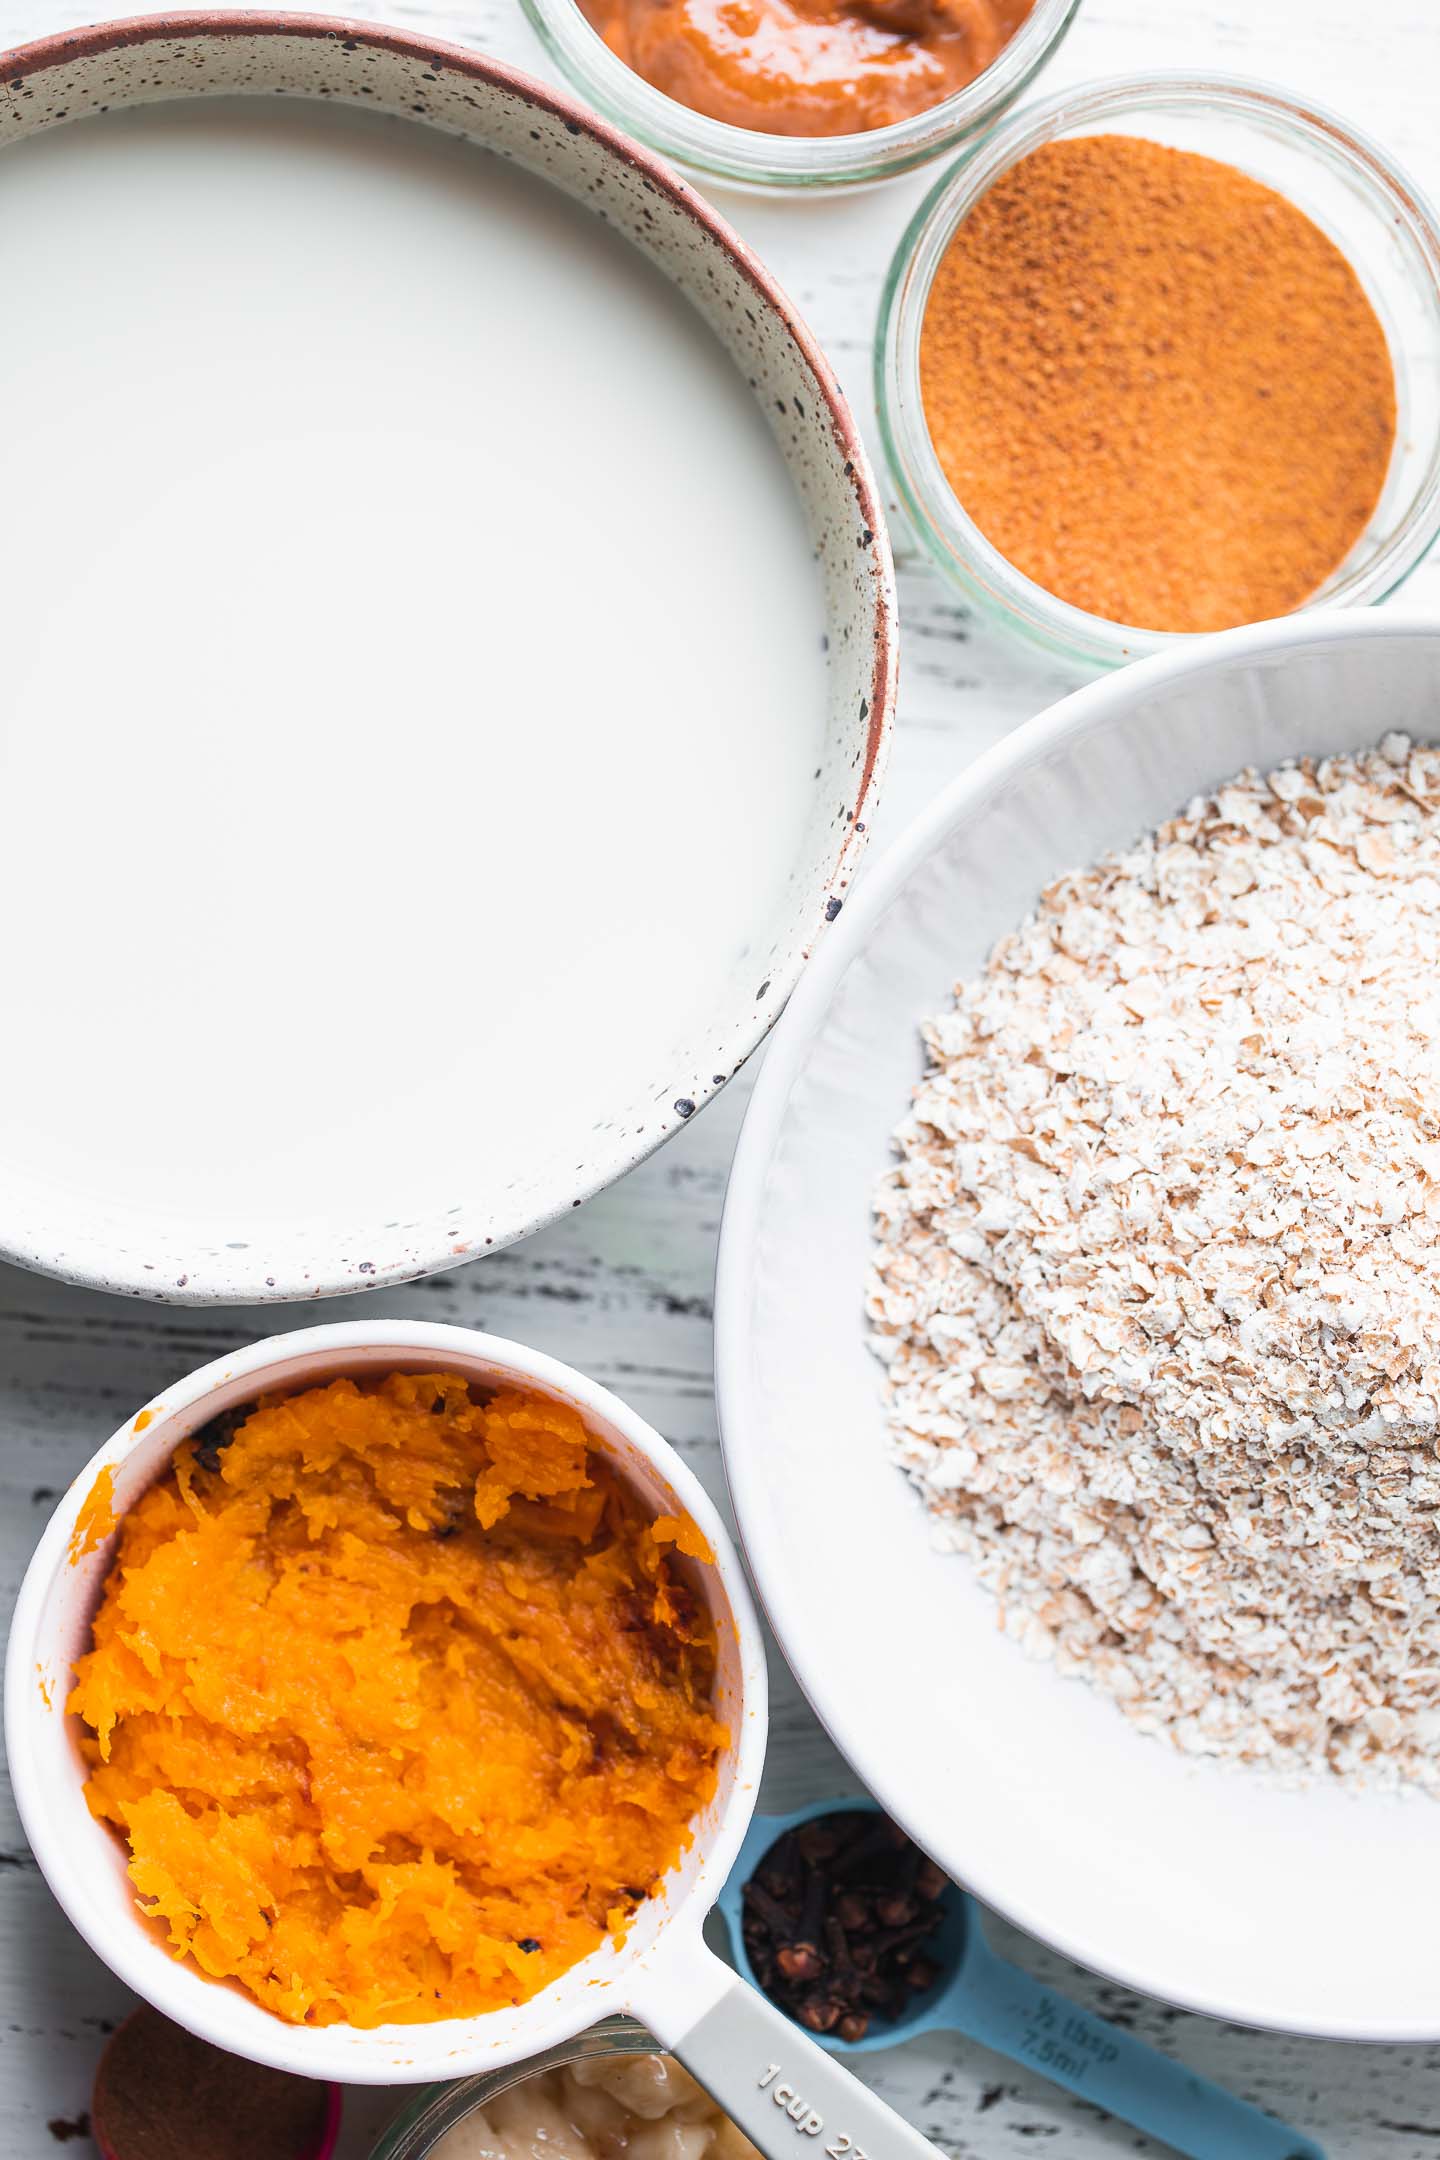 Ingredients for pumpkin baked oatmeal